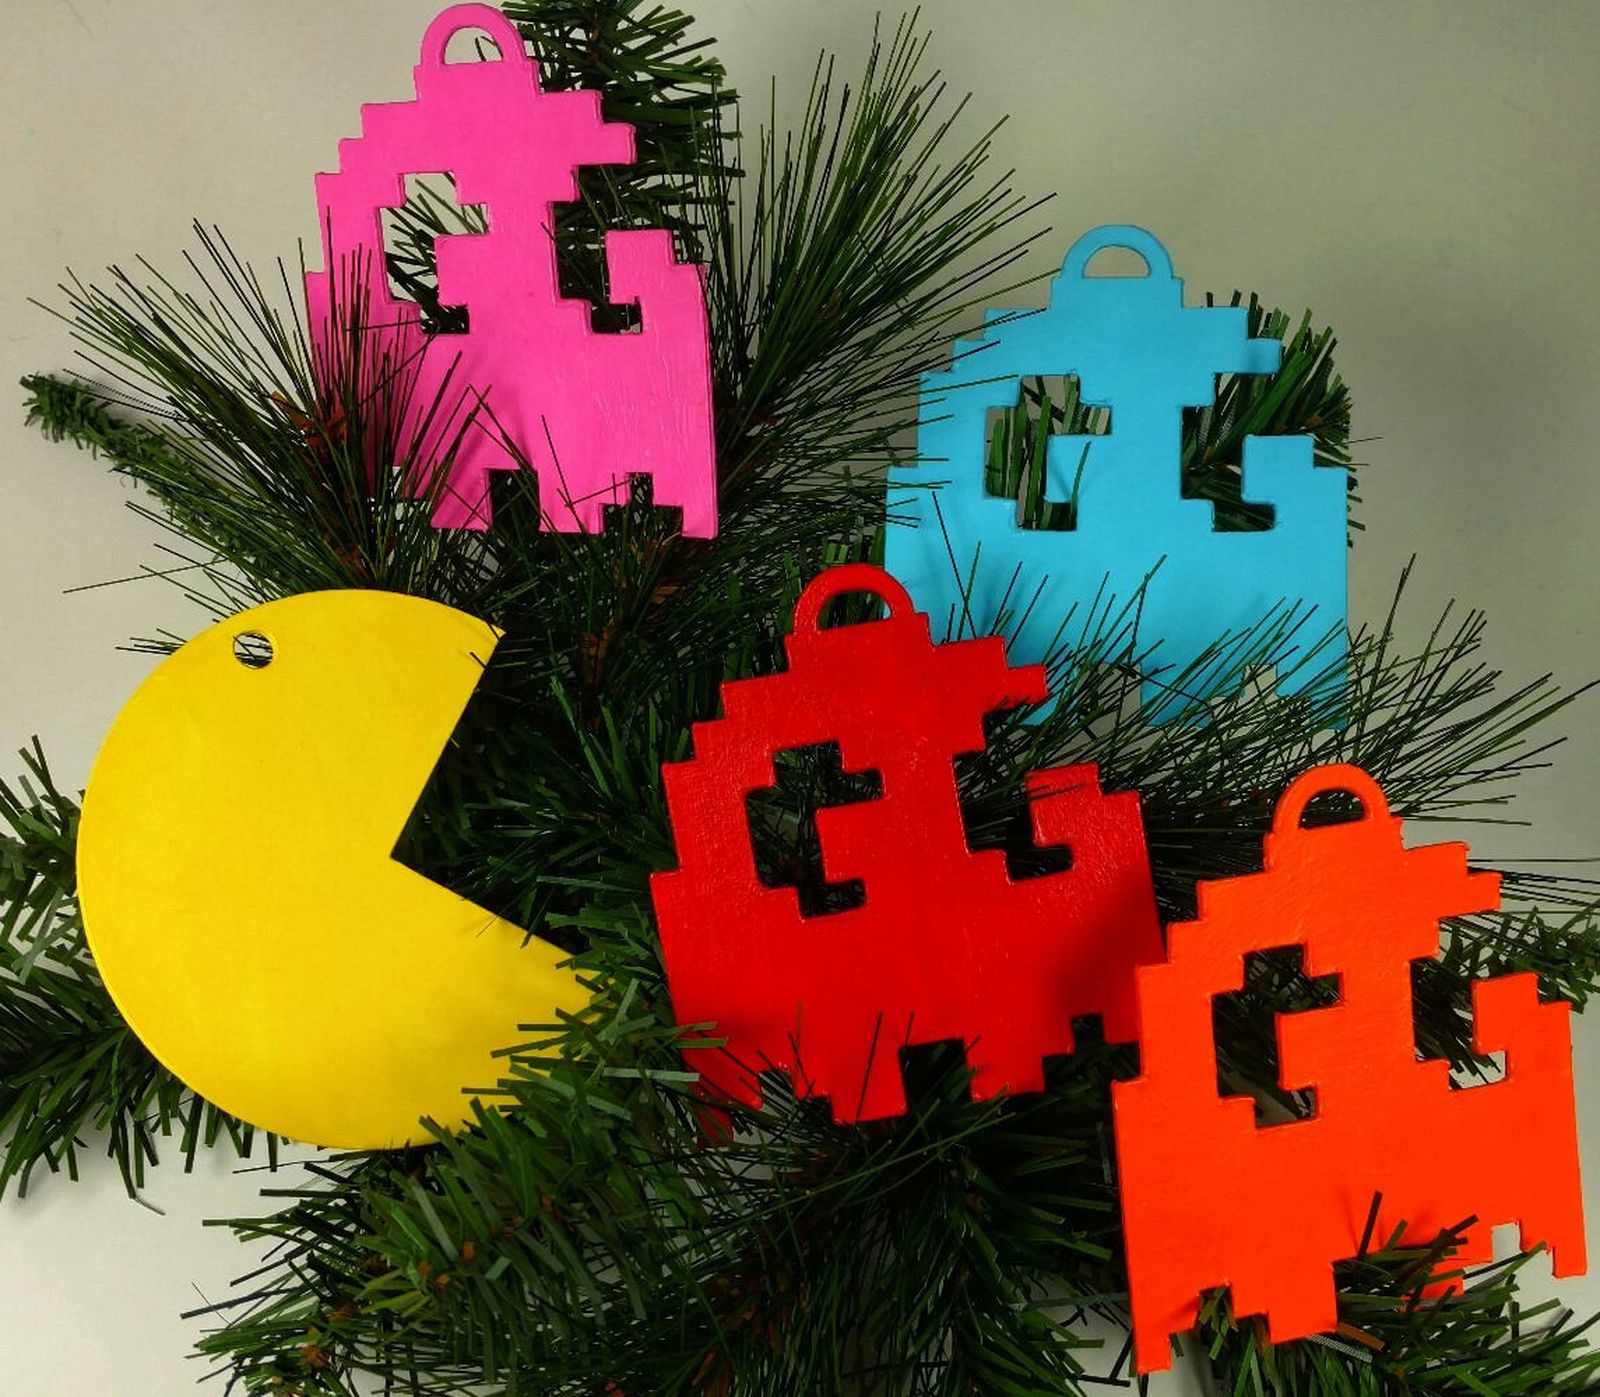 13 Best Christmas Decorations Every Geek Should Own image 26